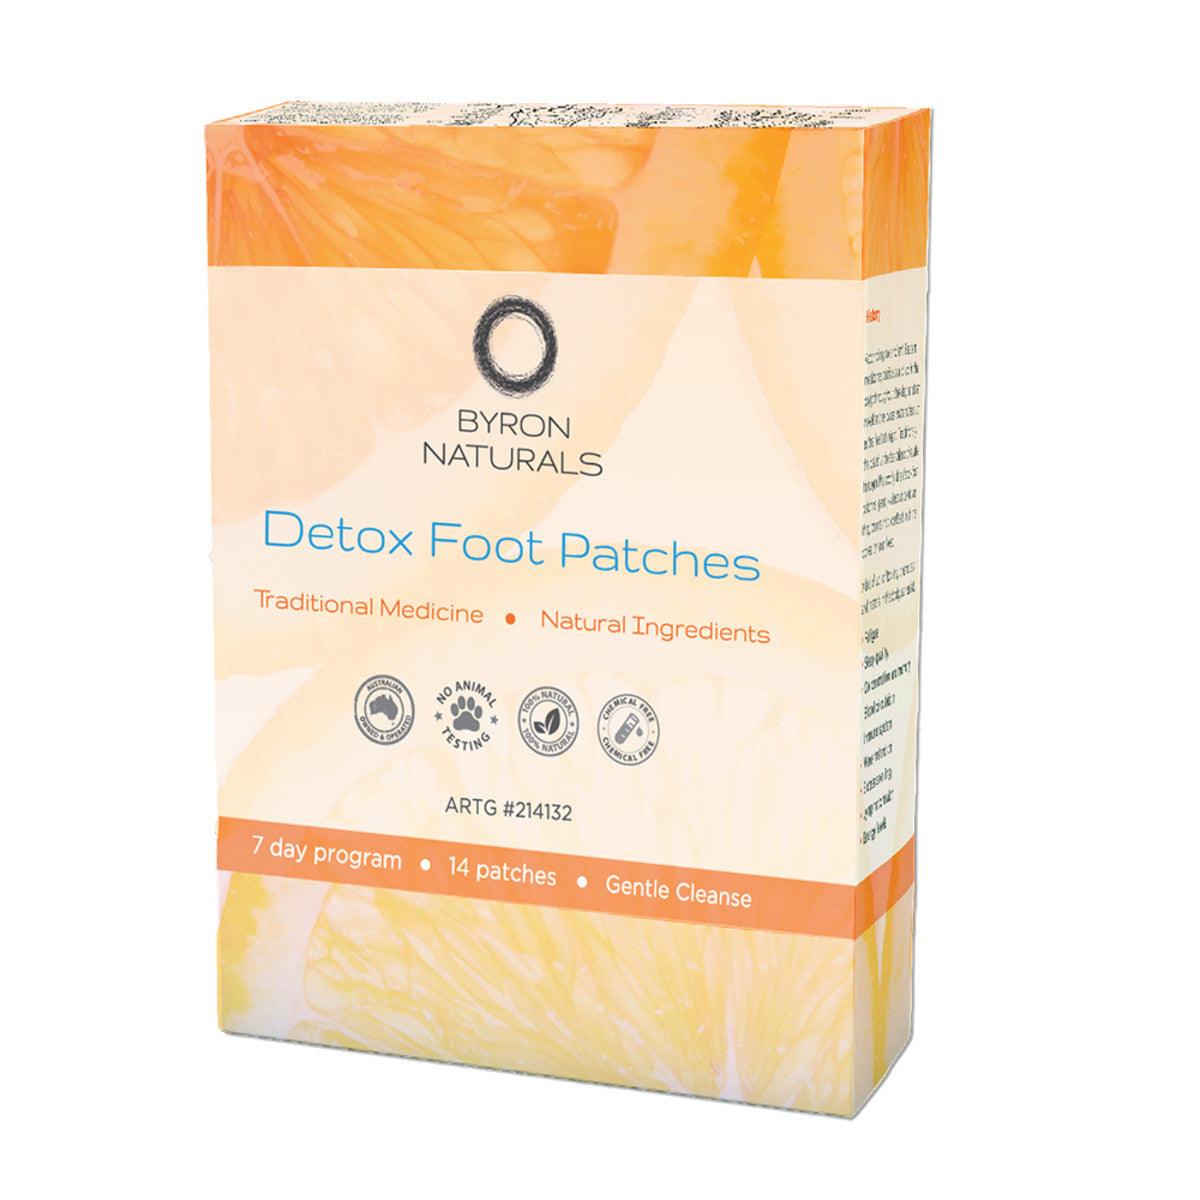 Byron Naturals Detox Foot Patches (7 Day Program) x 14 Patches (7 Pairs) - QVM Vitamins™